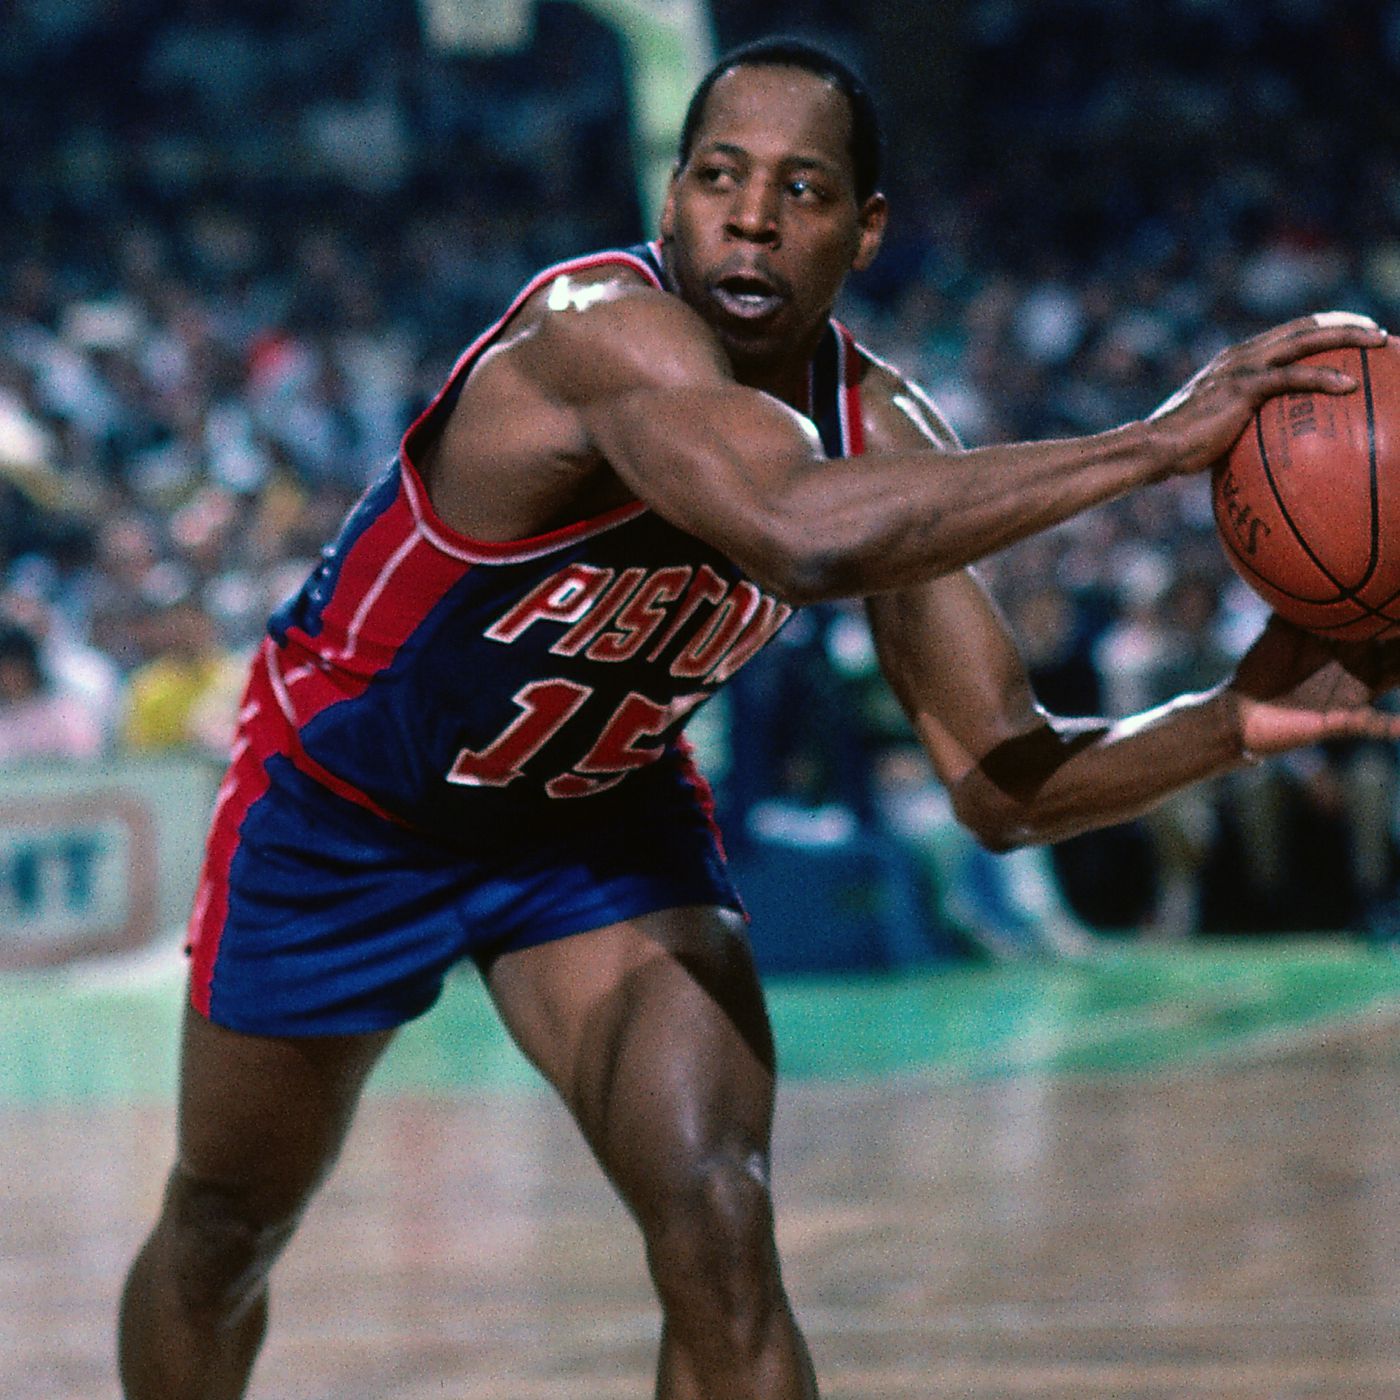 Vinnie Johnson, Inducted into the NYC Hall of Fame in 1996